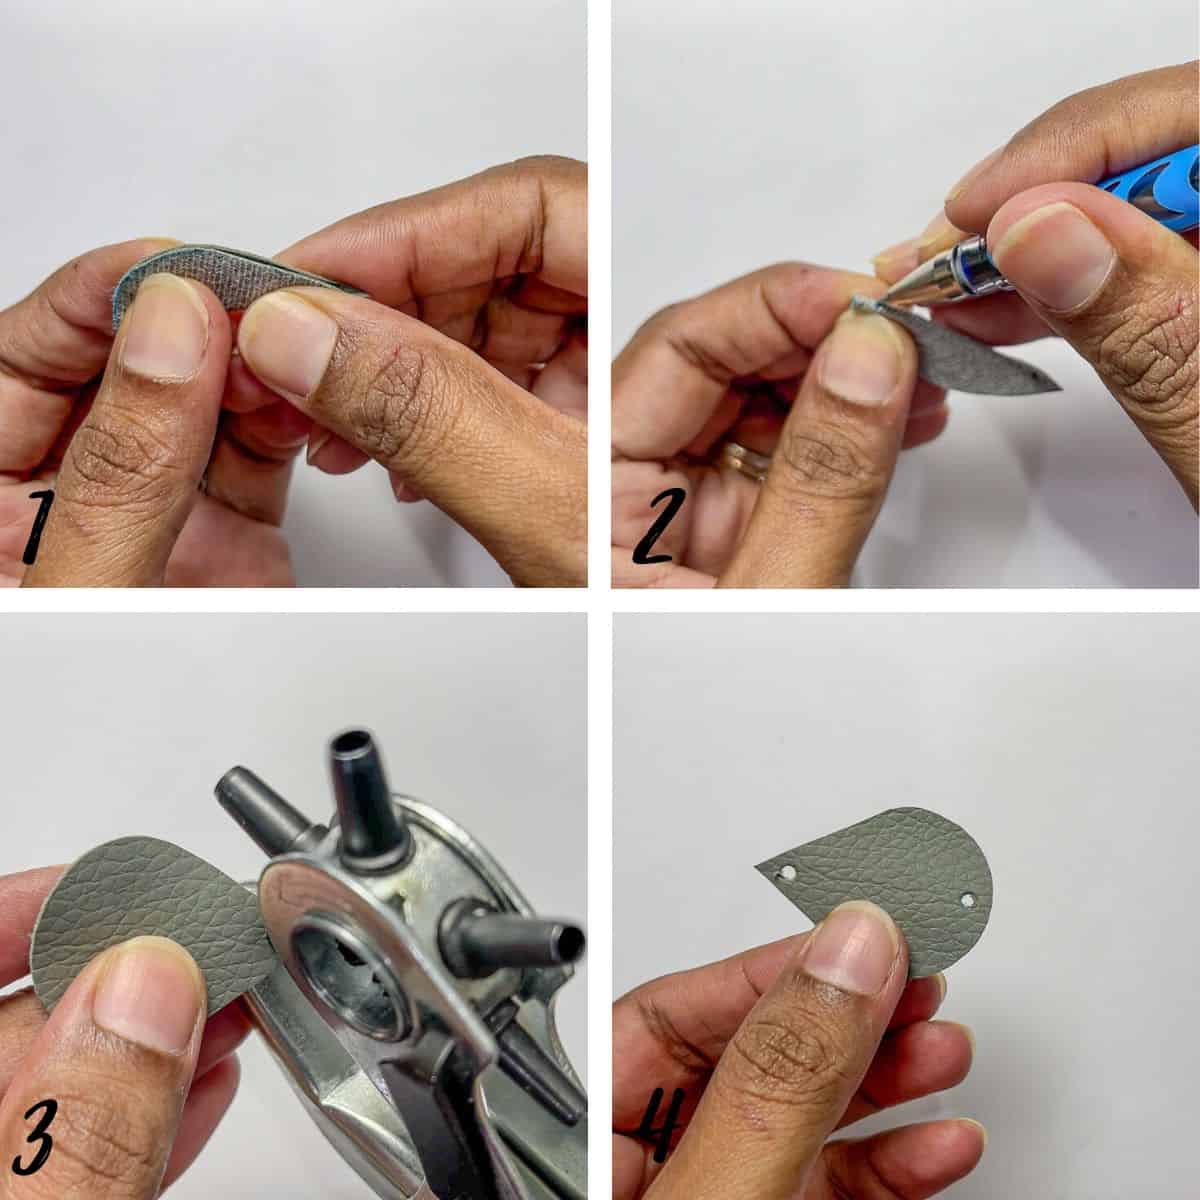 A poster of 4 images showing how to punch holes for jewelry.